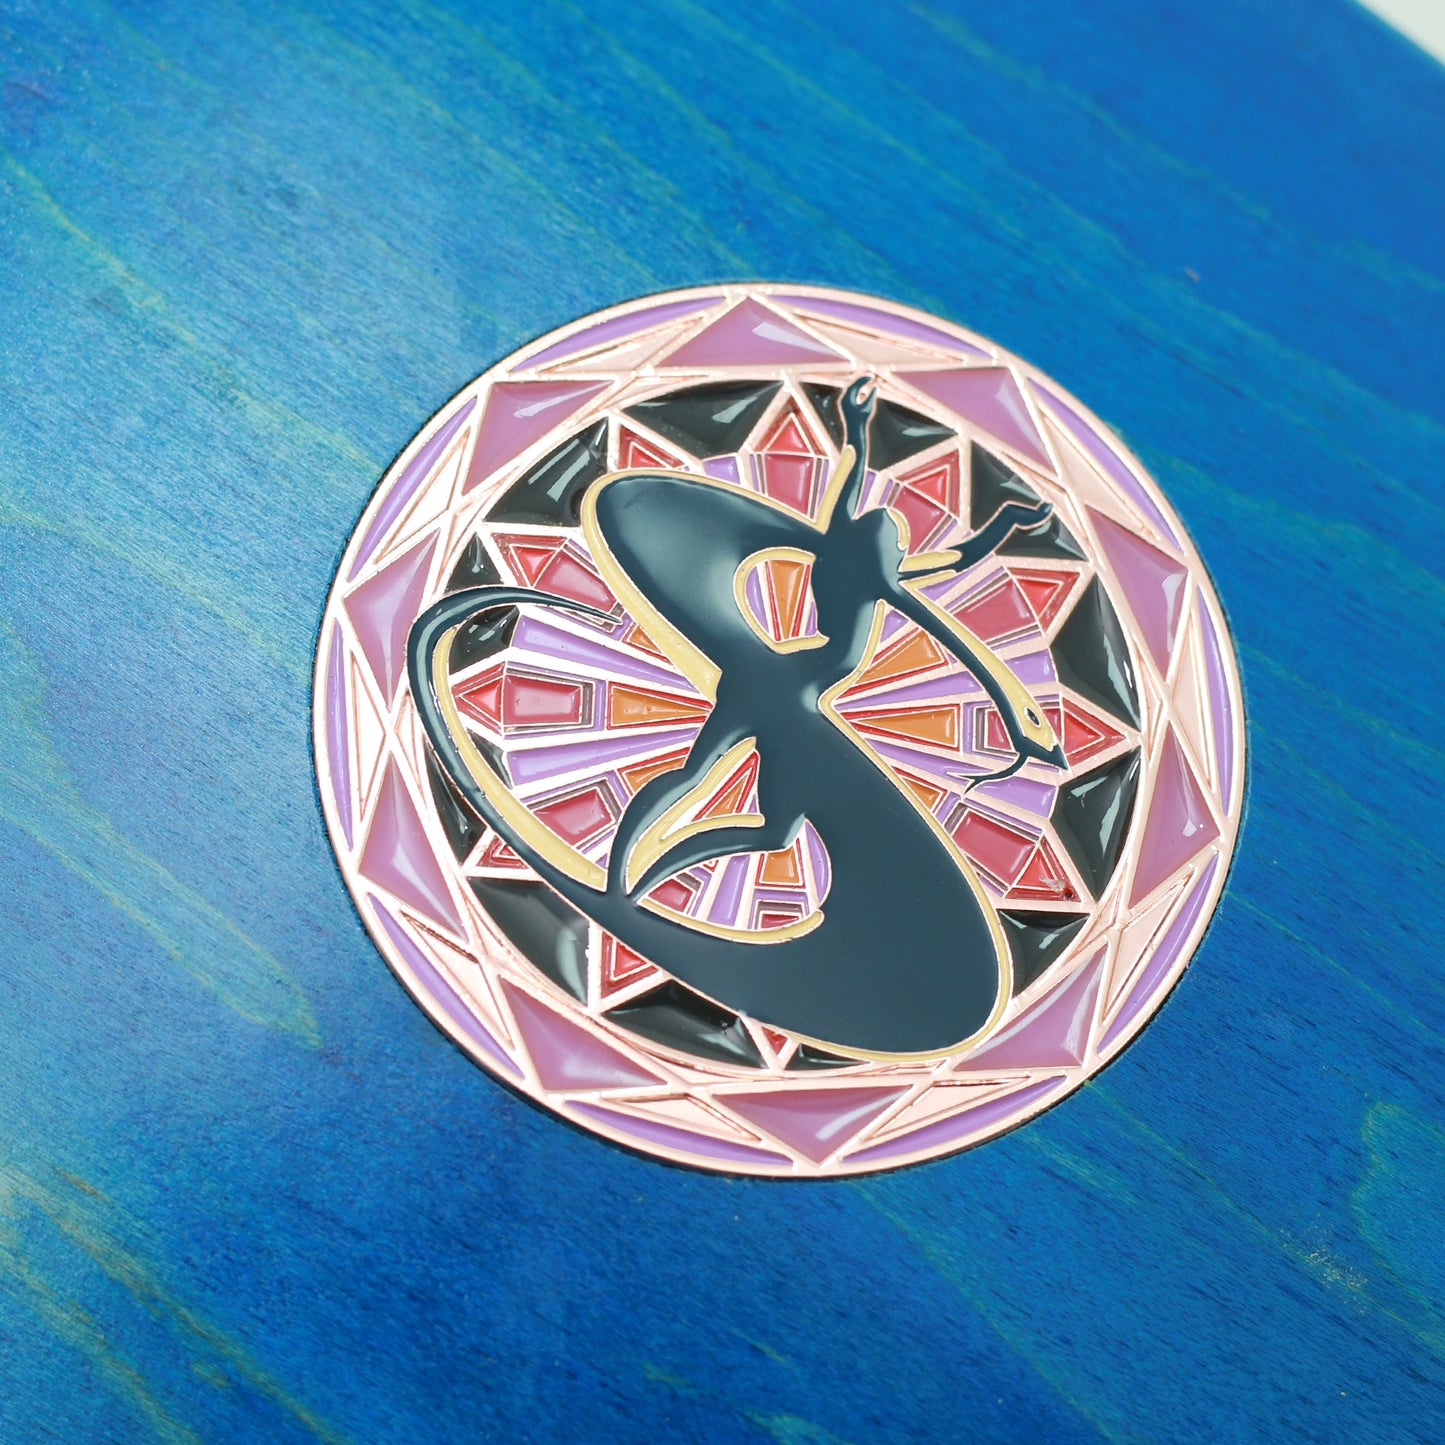 Phantasy Stained Glass Board (Blue)